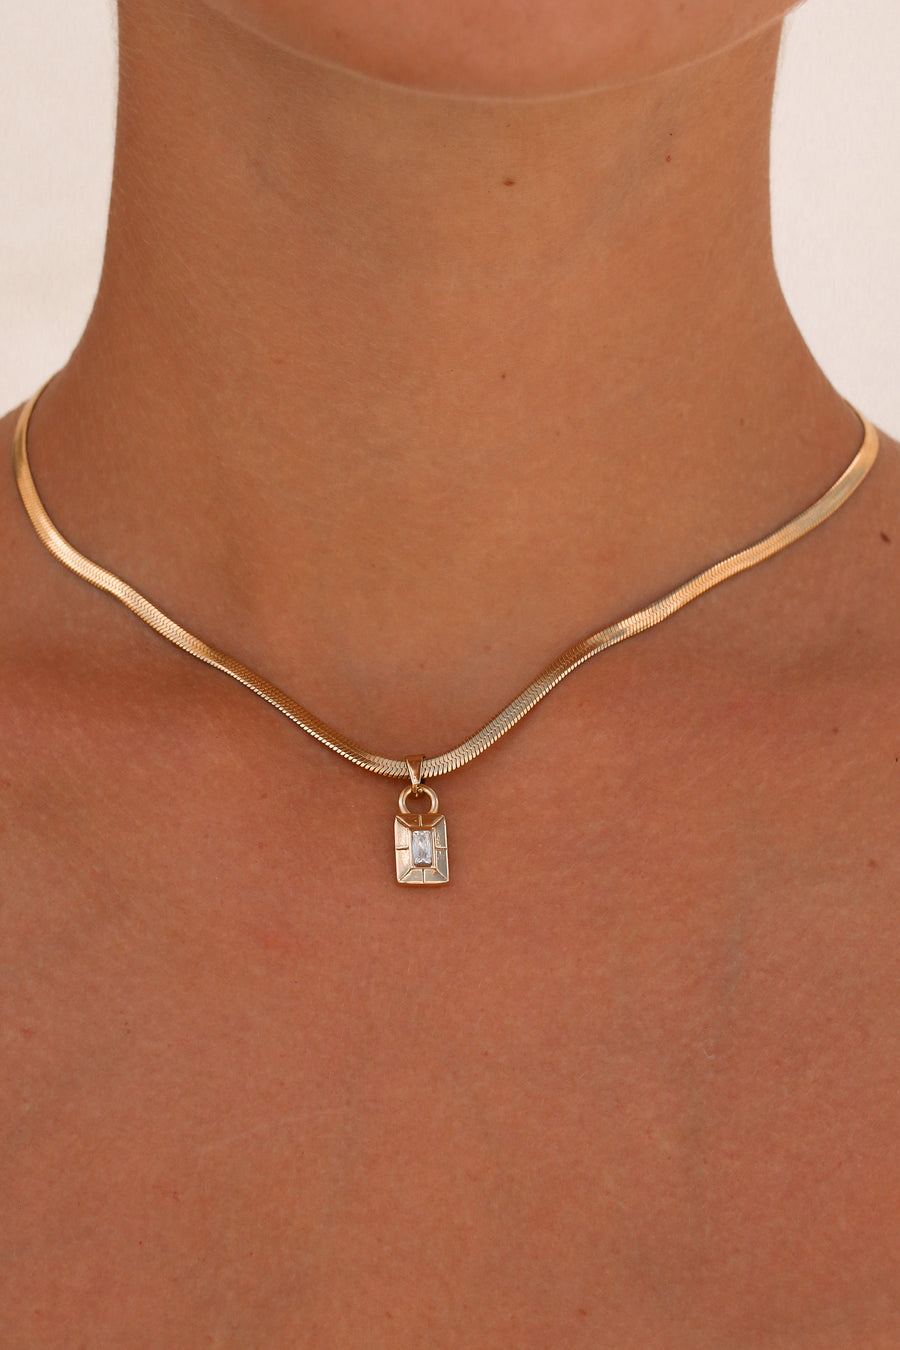 Dionne - Stainless Steel Gold or Silver Necklace